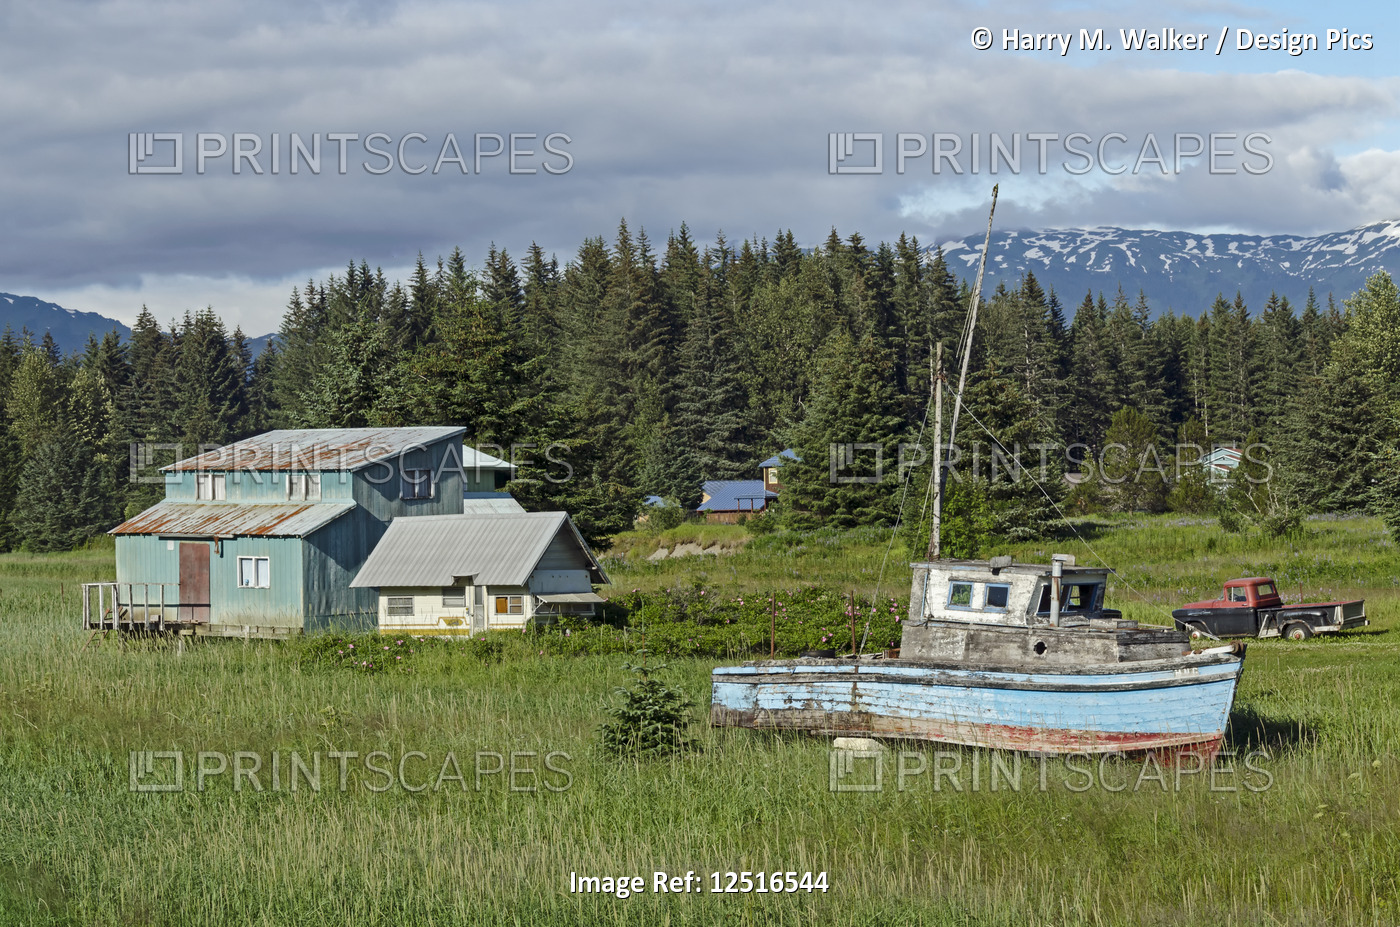 Rustic wooden boat and home on the grass shore near ferry dock, Southeast ...